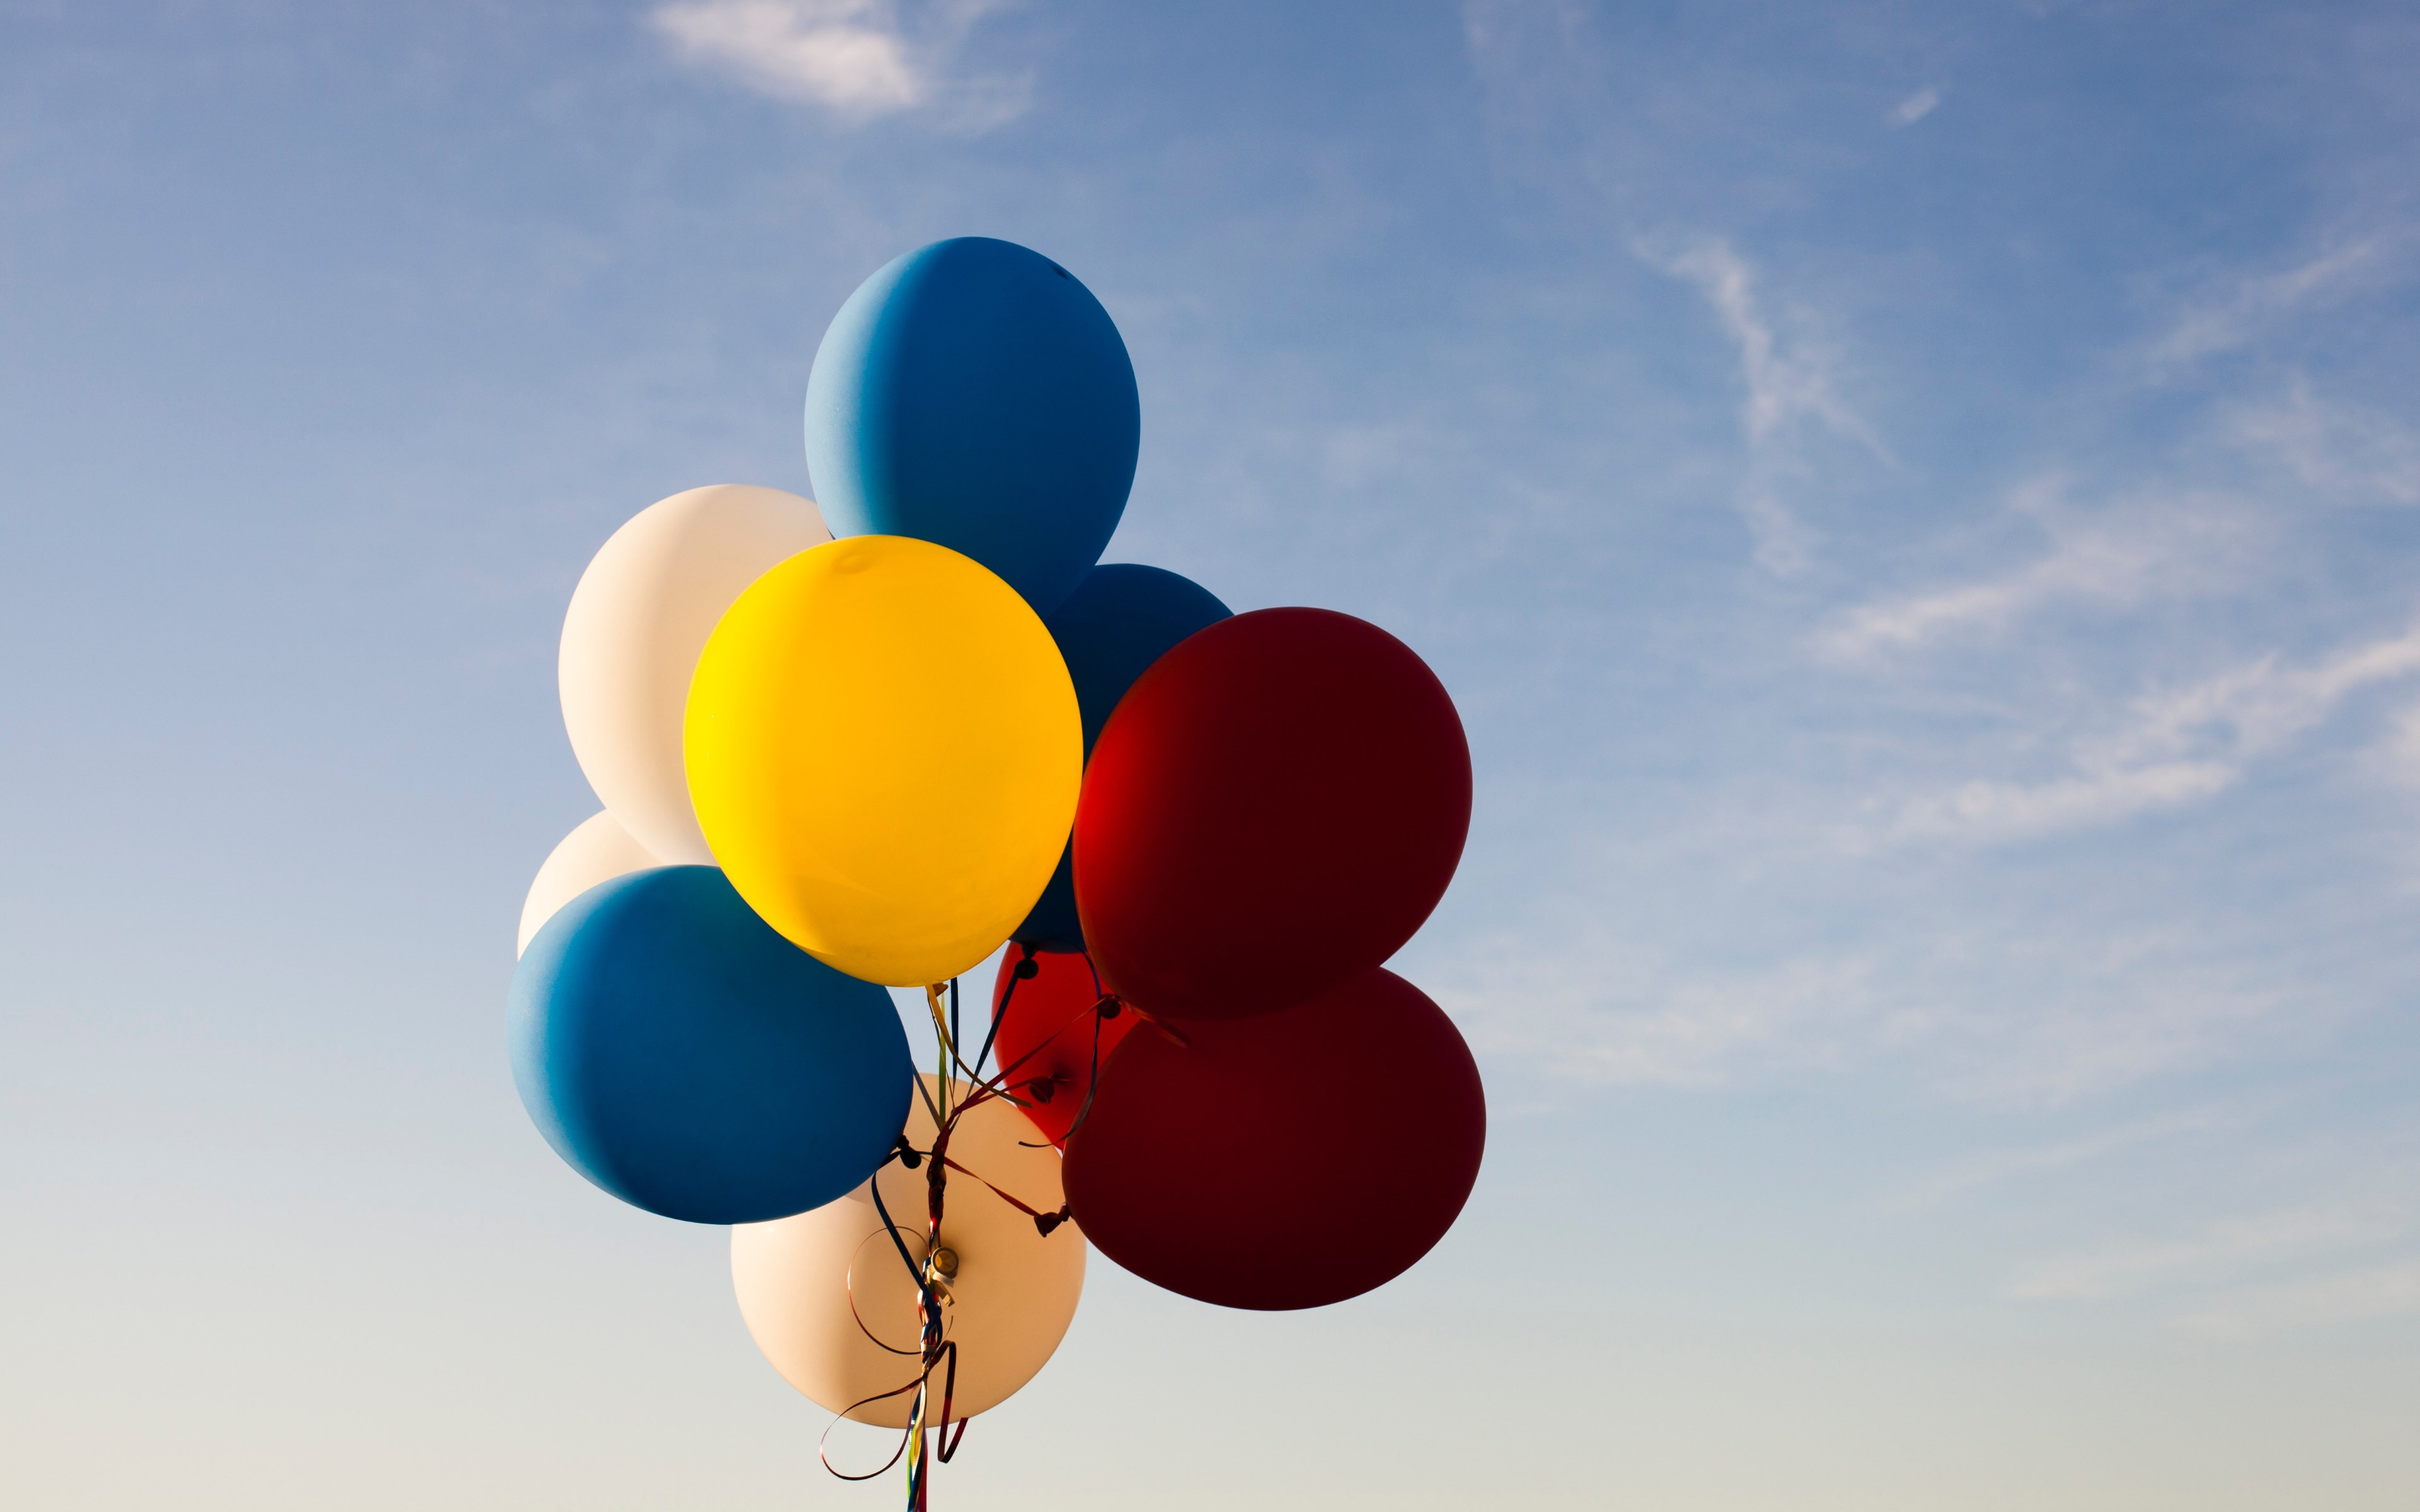 Colored balloons wallpaper 3840x2400